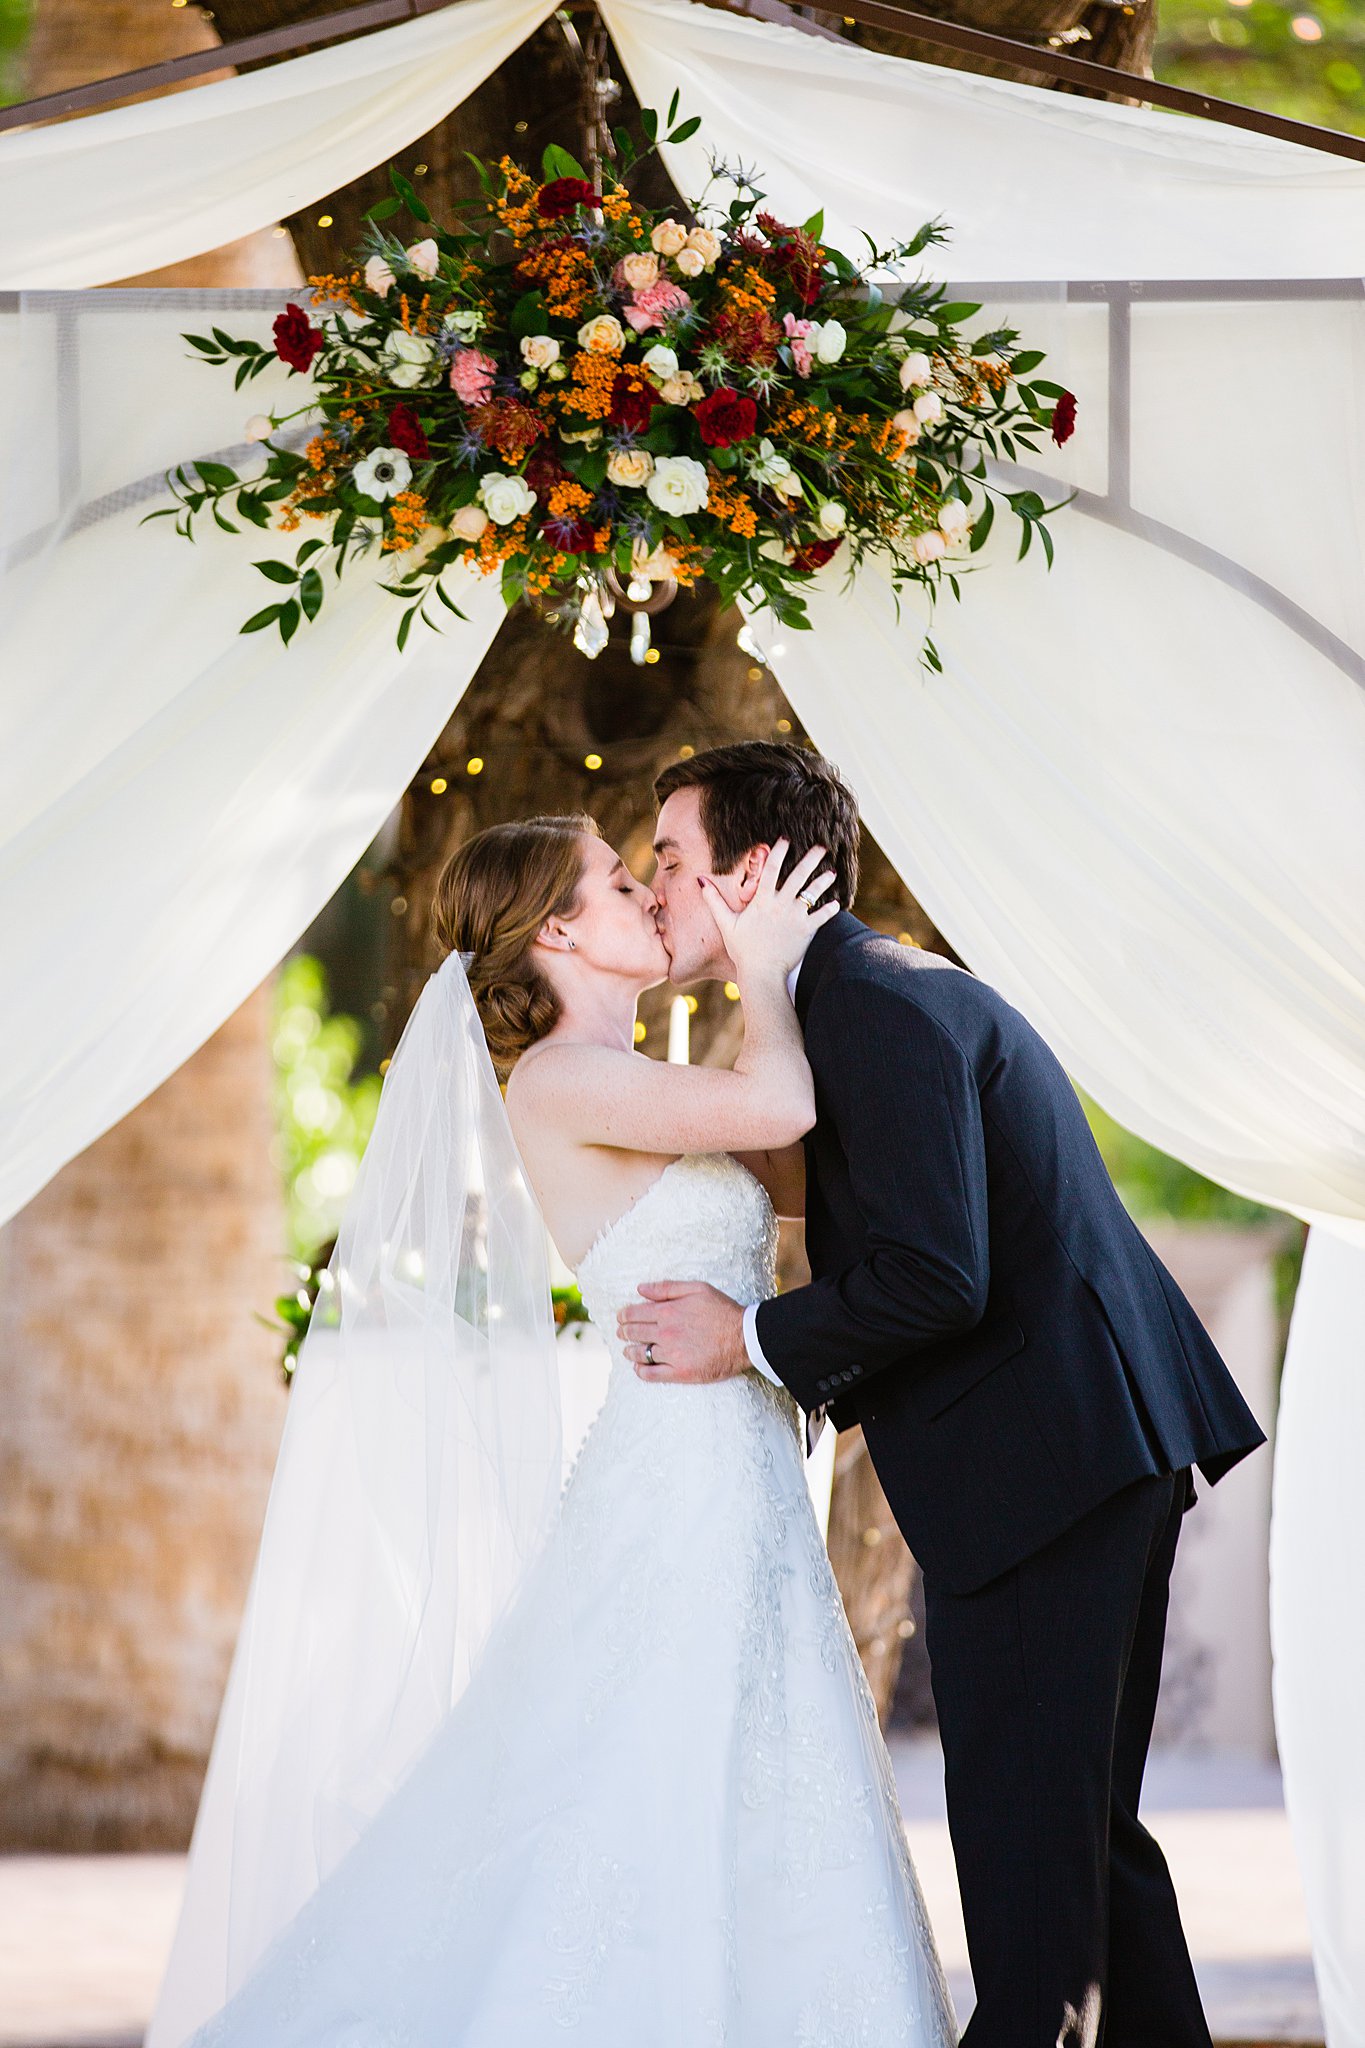 Bride and Groom share their first kiss during their wedding ceremony at Secret Garden Events by Arizona wedding photographer PMA Photography.